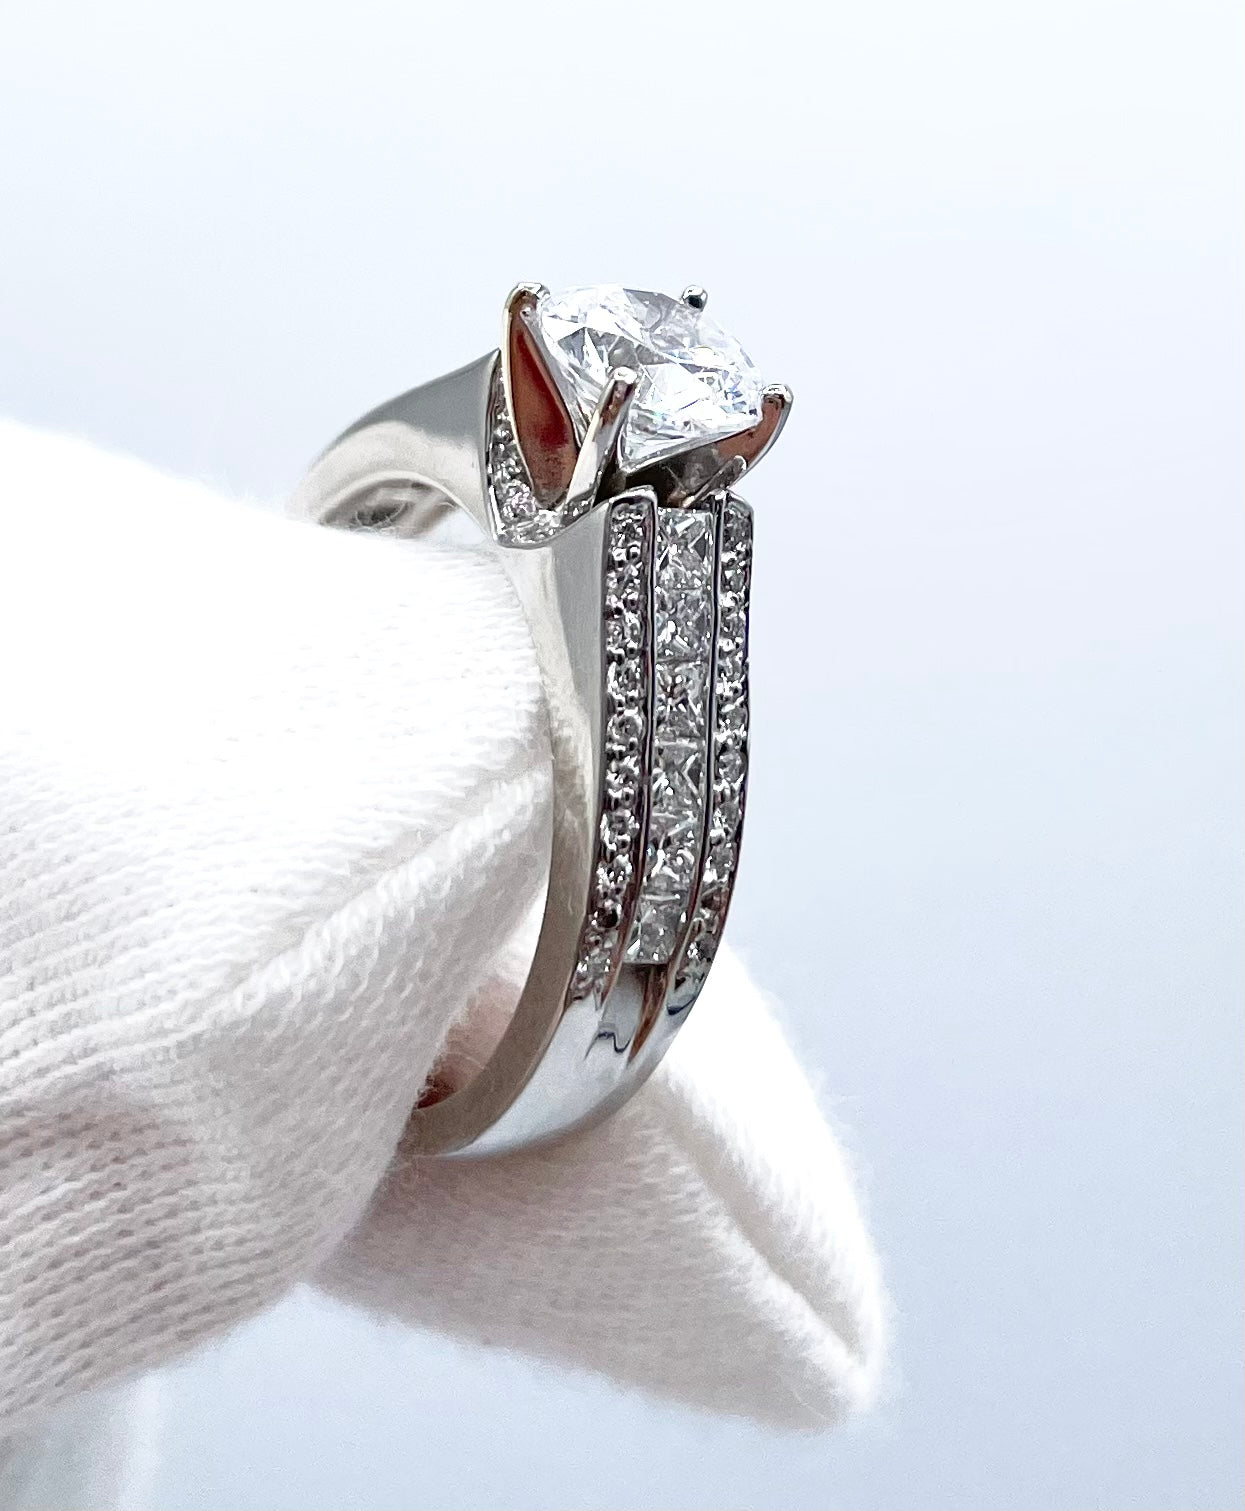 Royal Lace Band | Unusual wedding rings, Lace wedding band, Wedding rings  for women